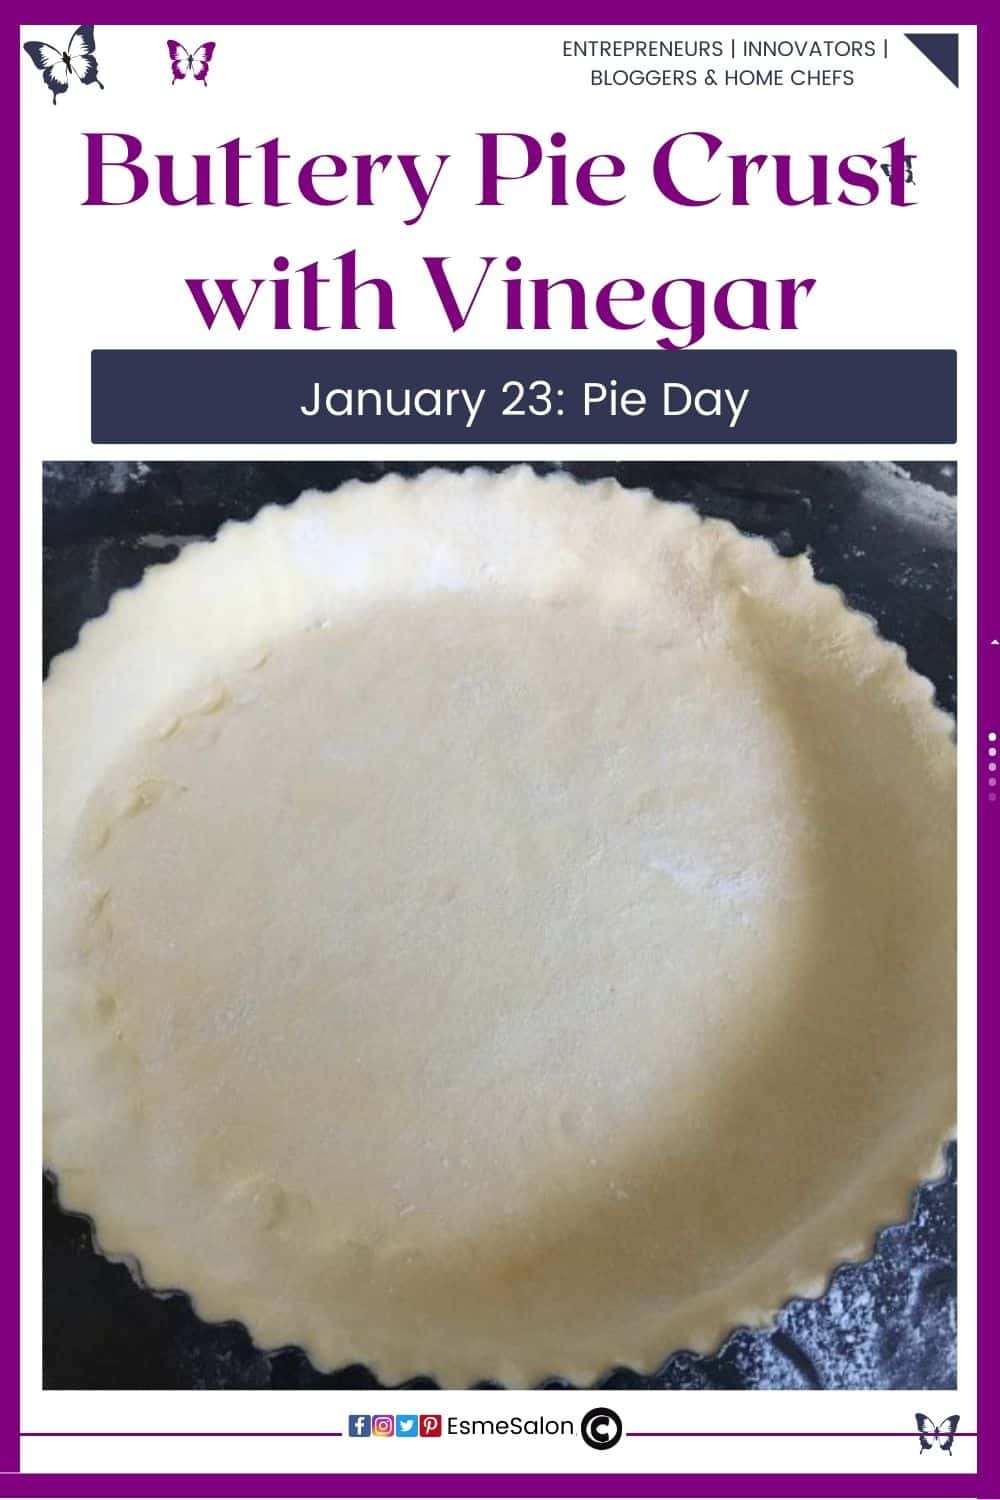 an image of a Buttery Pie Crust with Vinegar ready to be baked